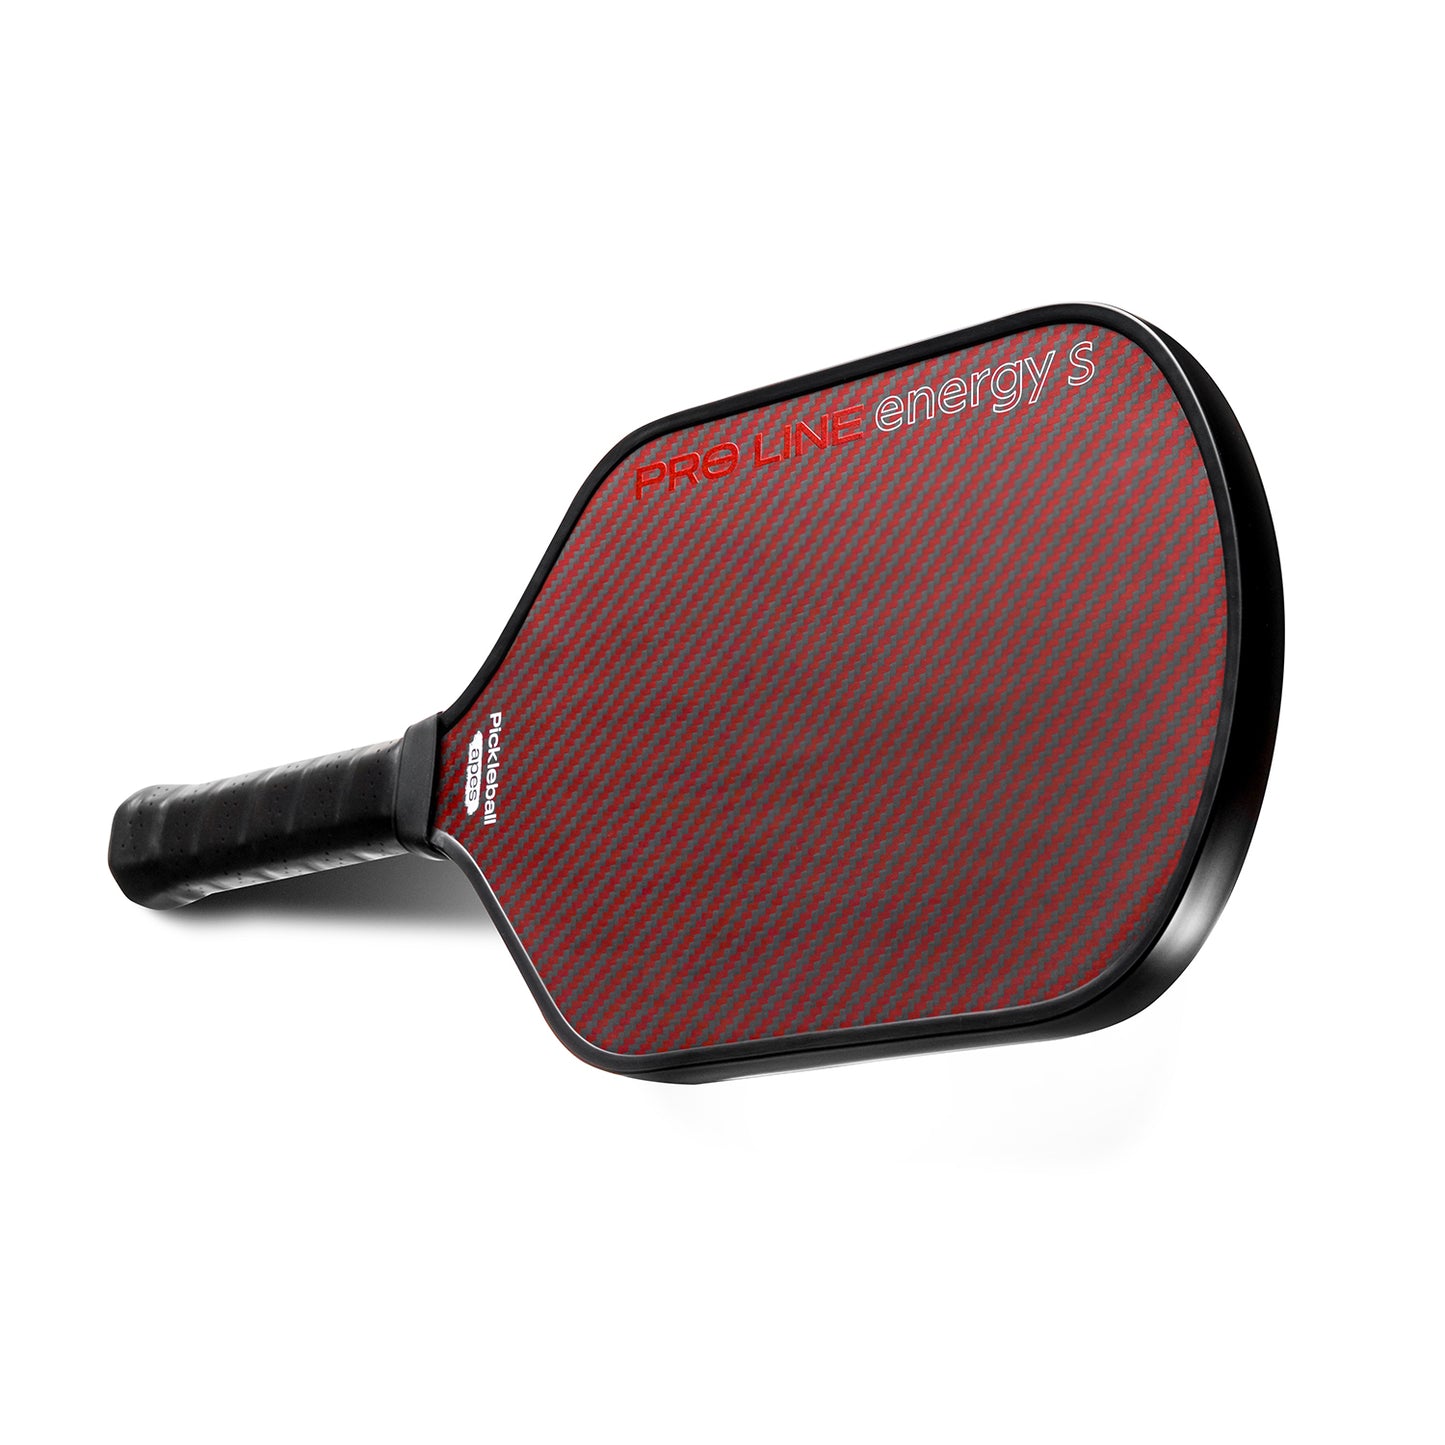 Pro Line Energy S Pickleball Paddle (Includes Paddle Cover)